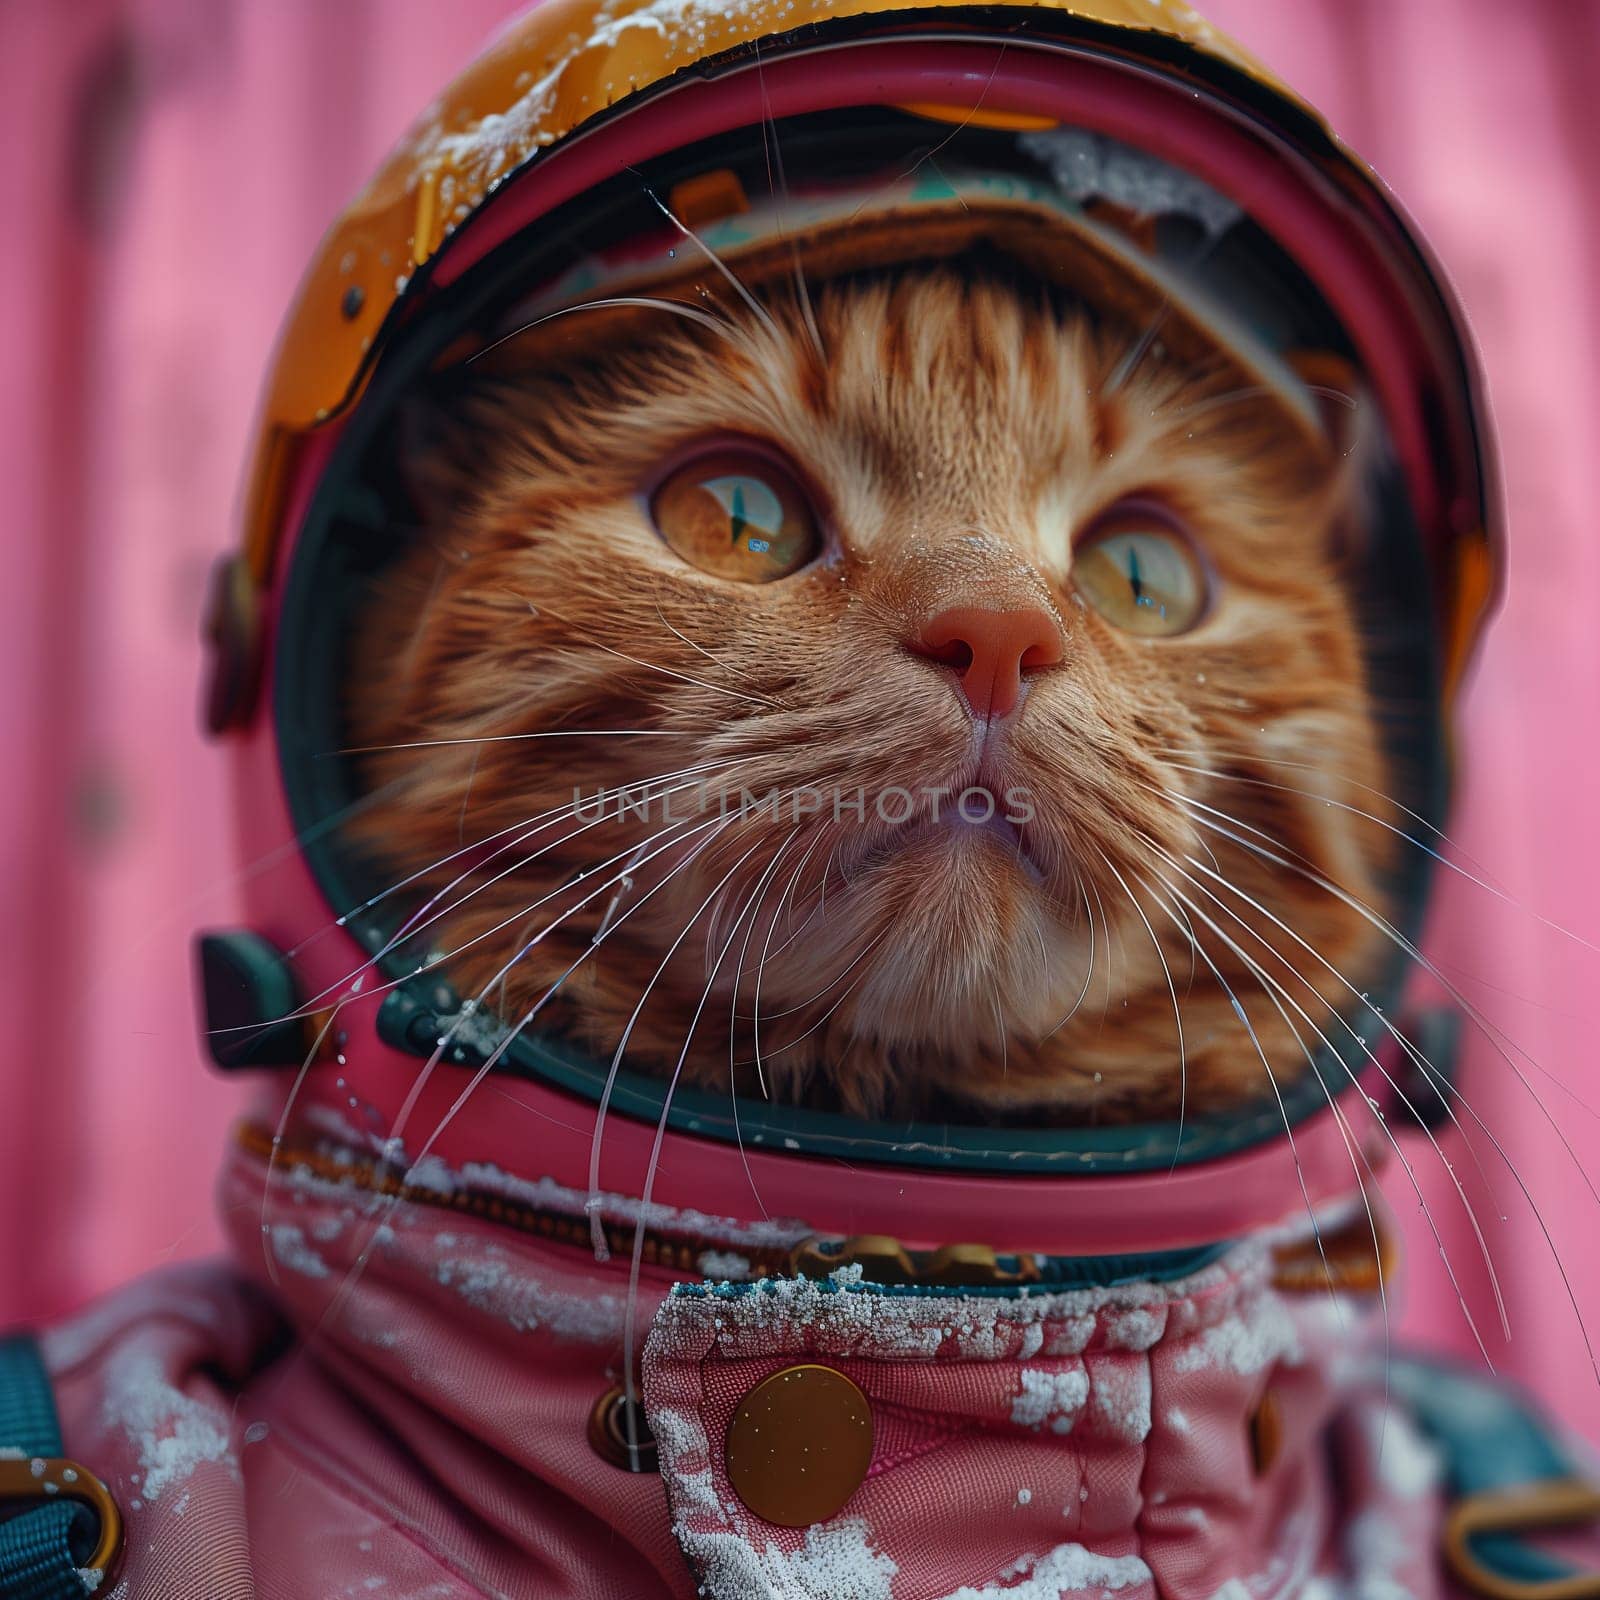 A closeup photo of a happy Carnivore Felidae cat in a space suit and helmet. The small to mediumsized cat has whiskers, a snout, magenta fur, and a patterned design on the suit